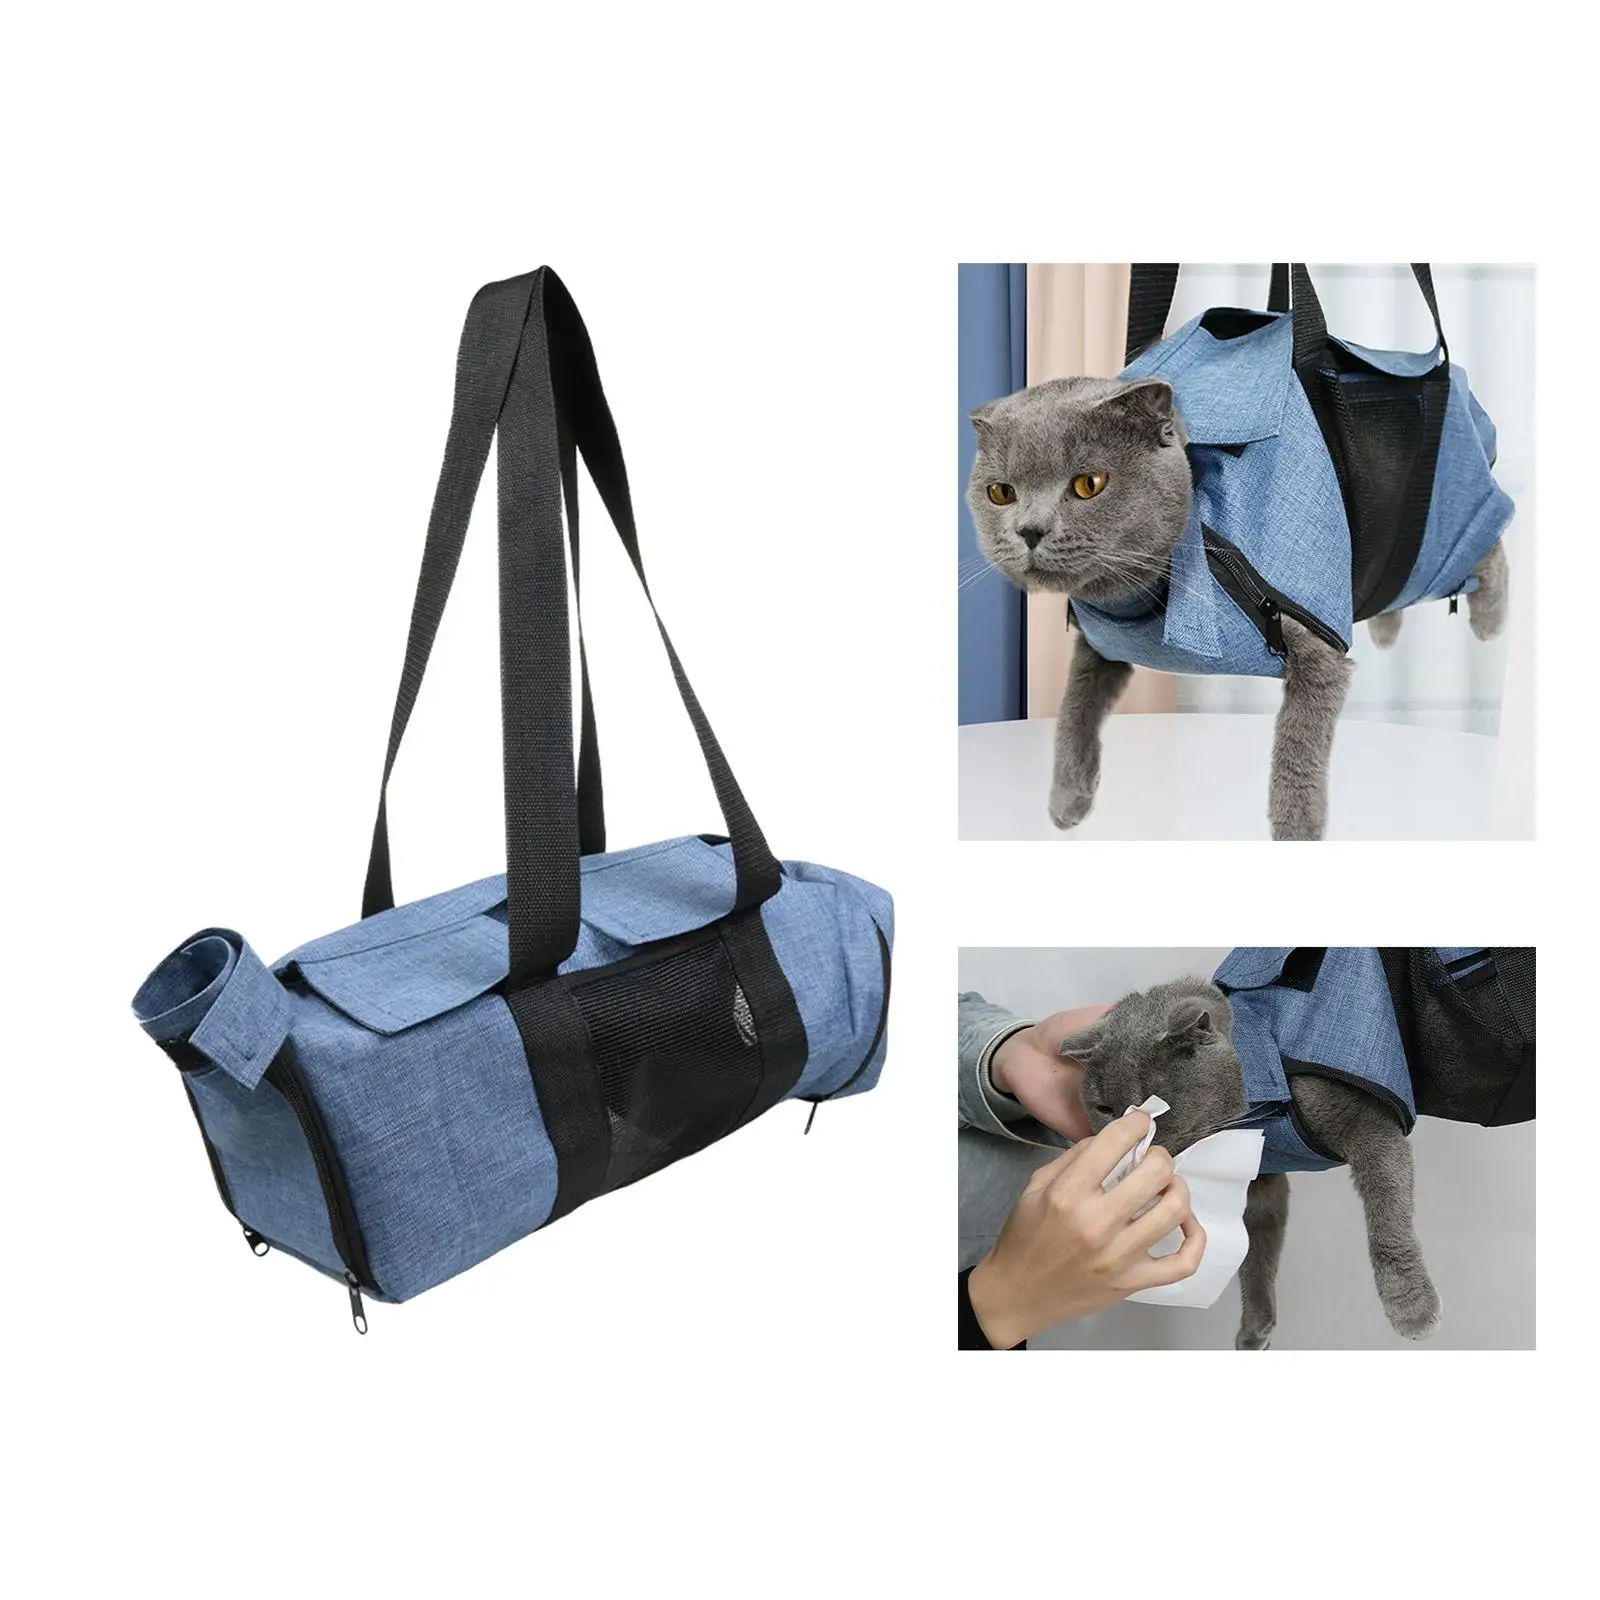 Cat Grooming Restraint Bag, Hammock Clip Harness Carrying Breathable for Daily Bathing Claw Trimming Bathing